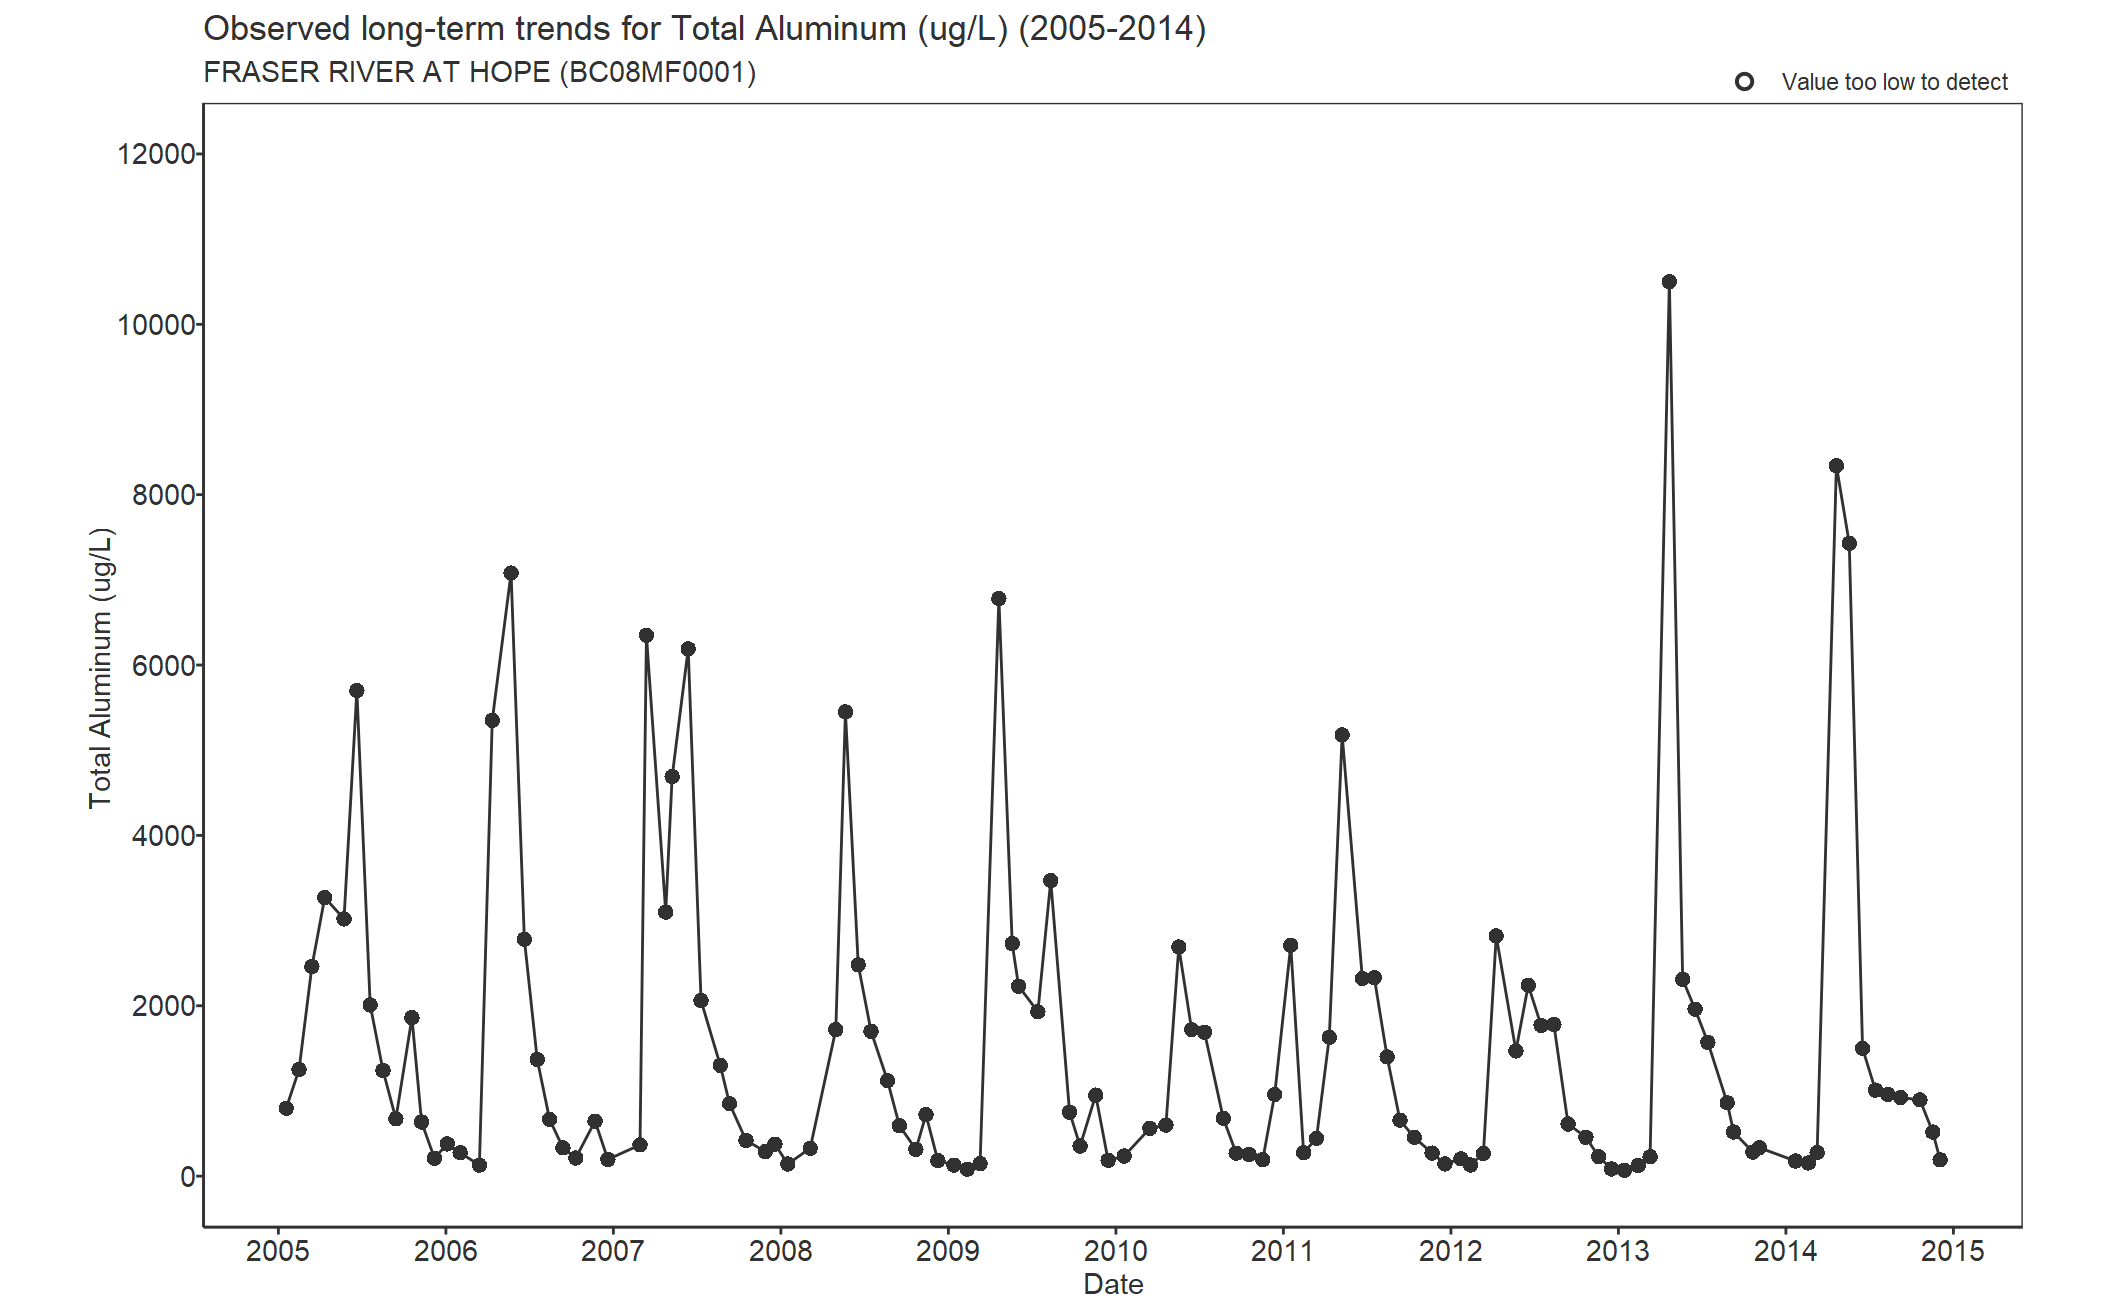 Observed long-term trends for Aluminum Total (2005-2014)